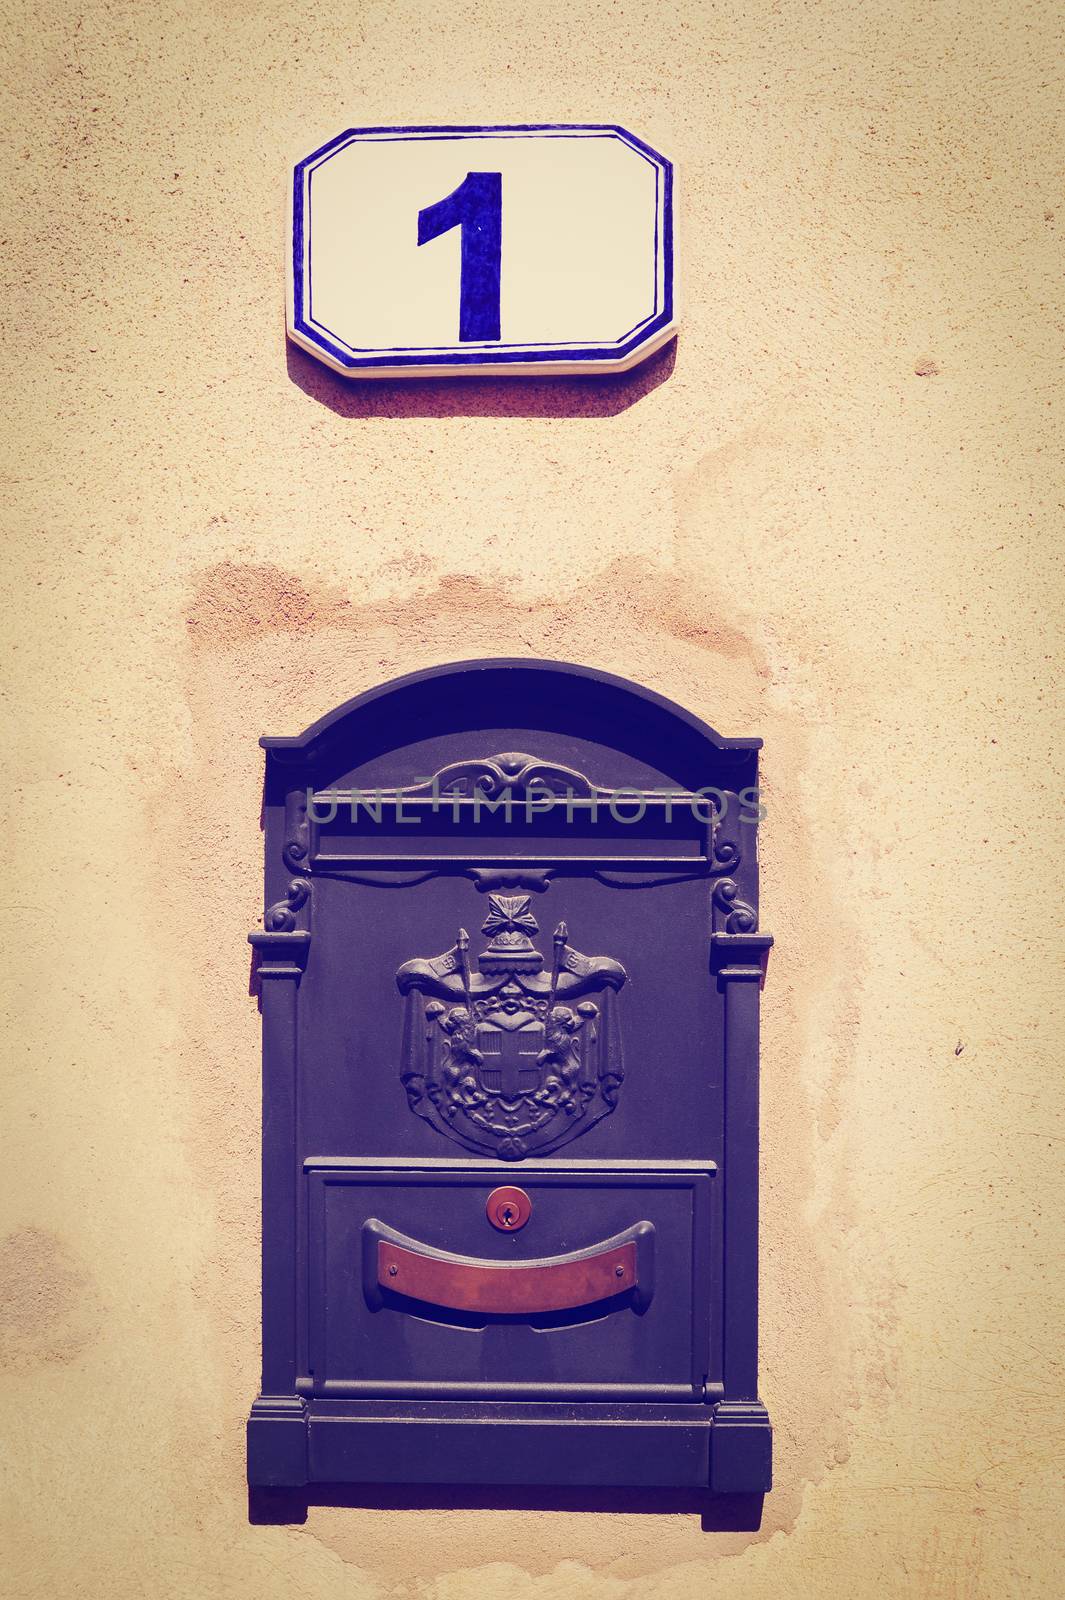  Post Boxe on the Wal, Instagram Effectl